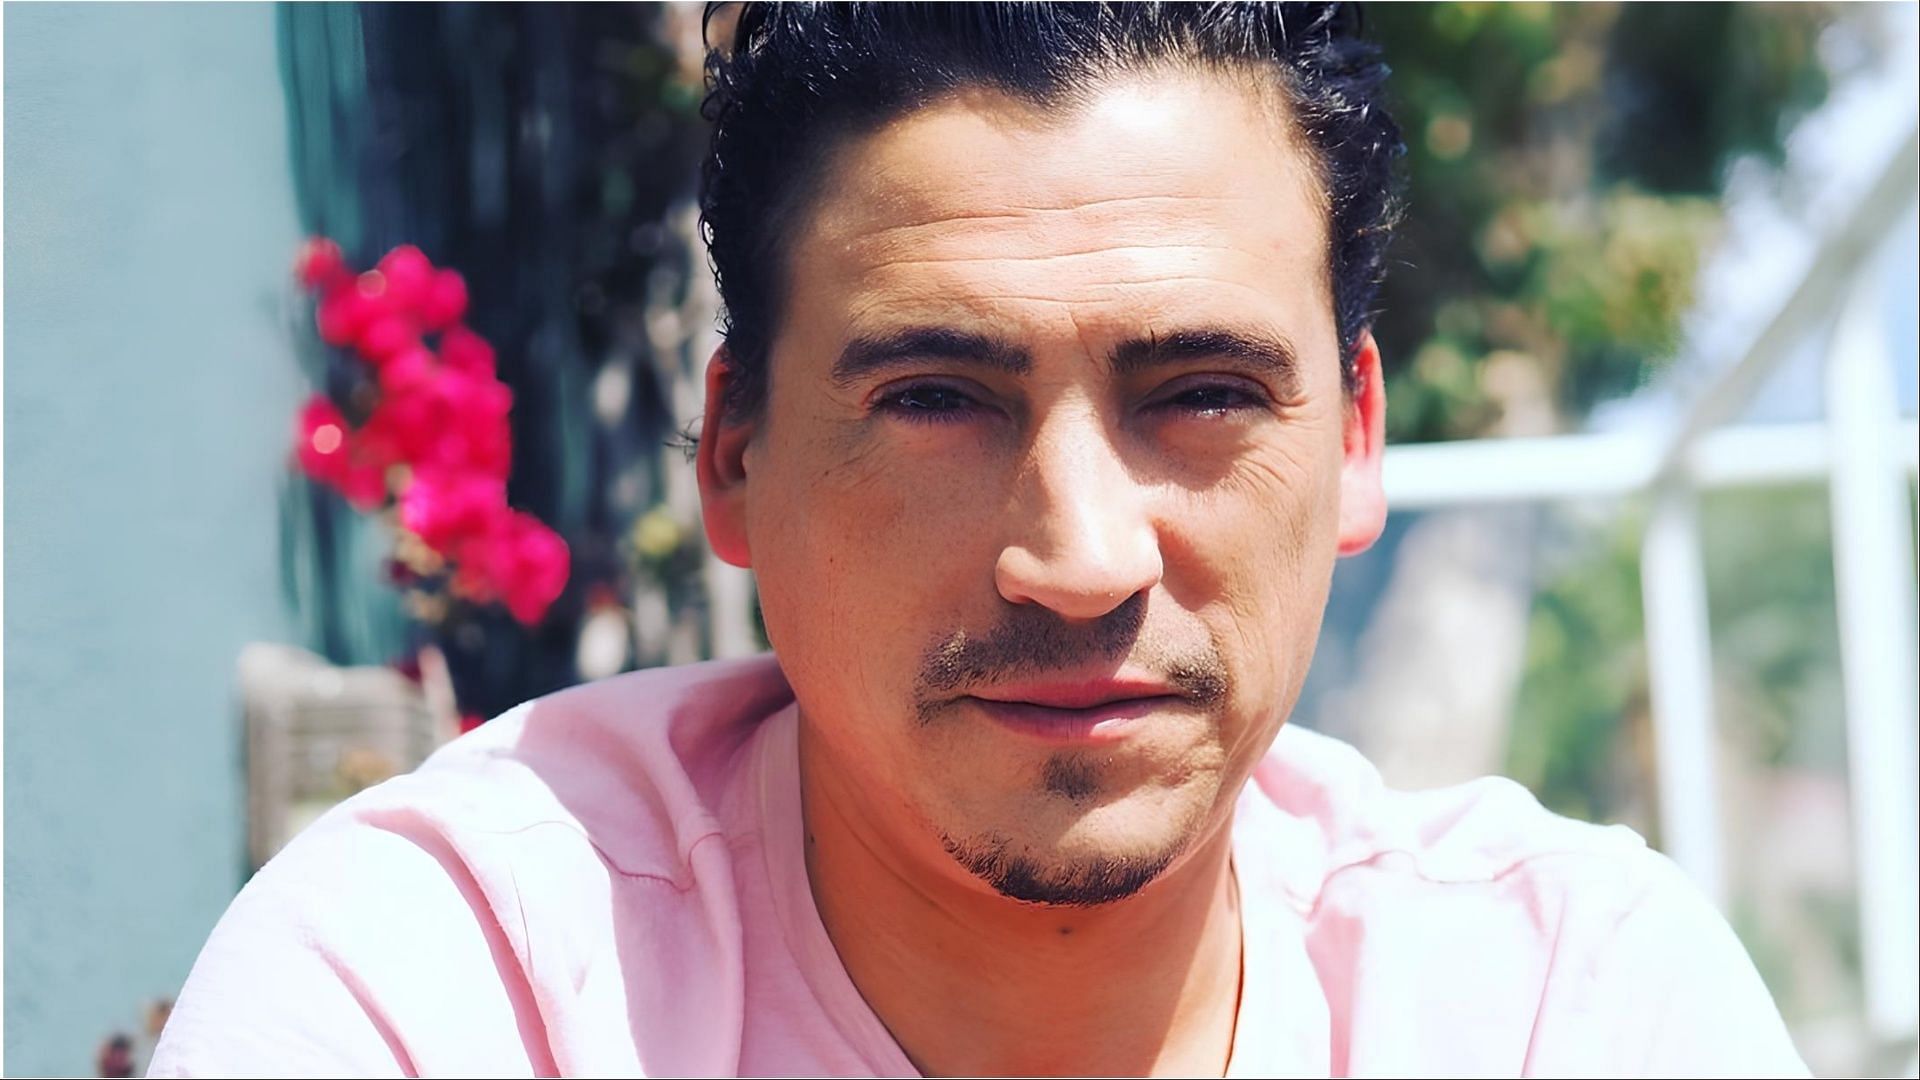 Andrew Keegan addressed the rumors saying that he was operating a cult (Image via andrewkeegn/Instagram)